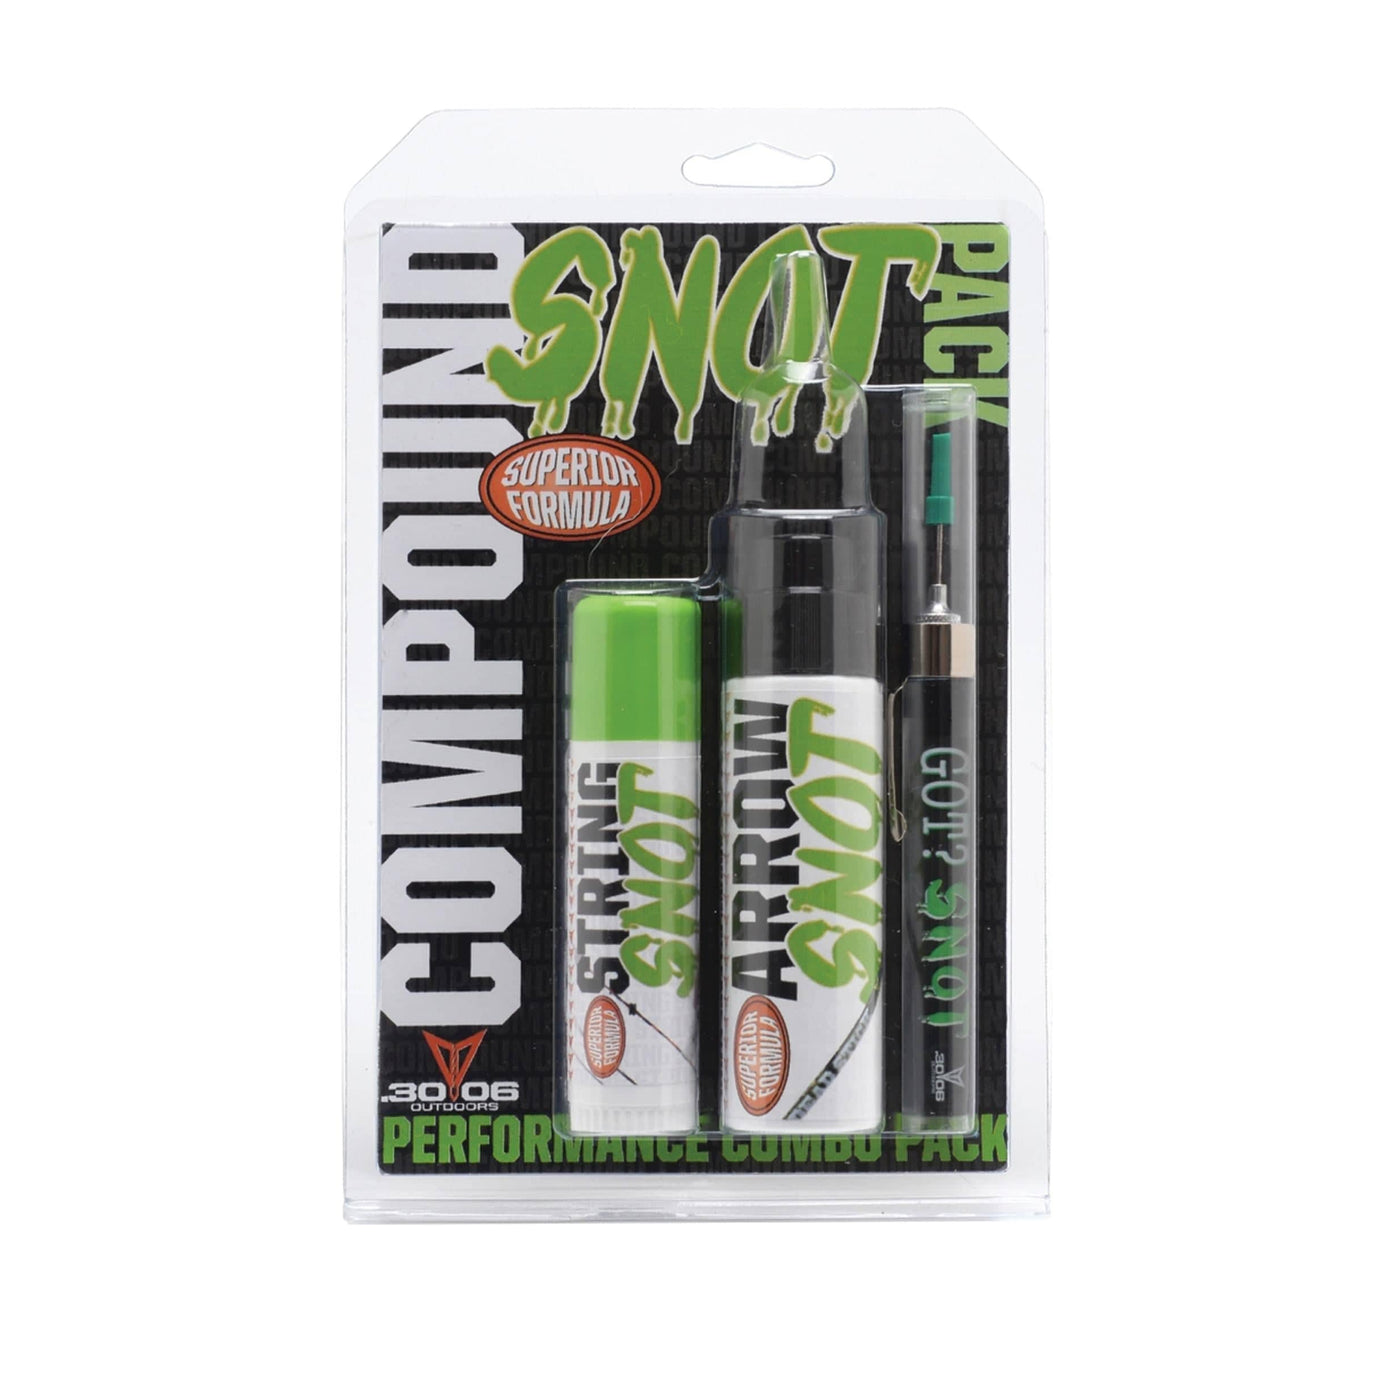 .30-06 Outdoors .30-06 Snot Lube 3 Pack for Compounds Archery